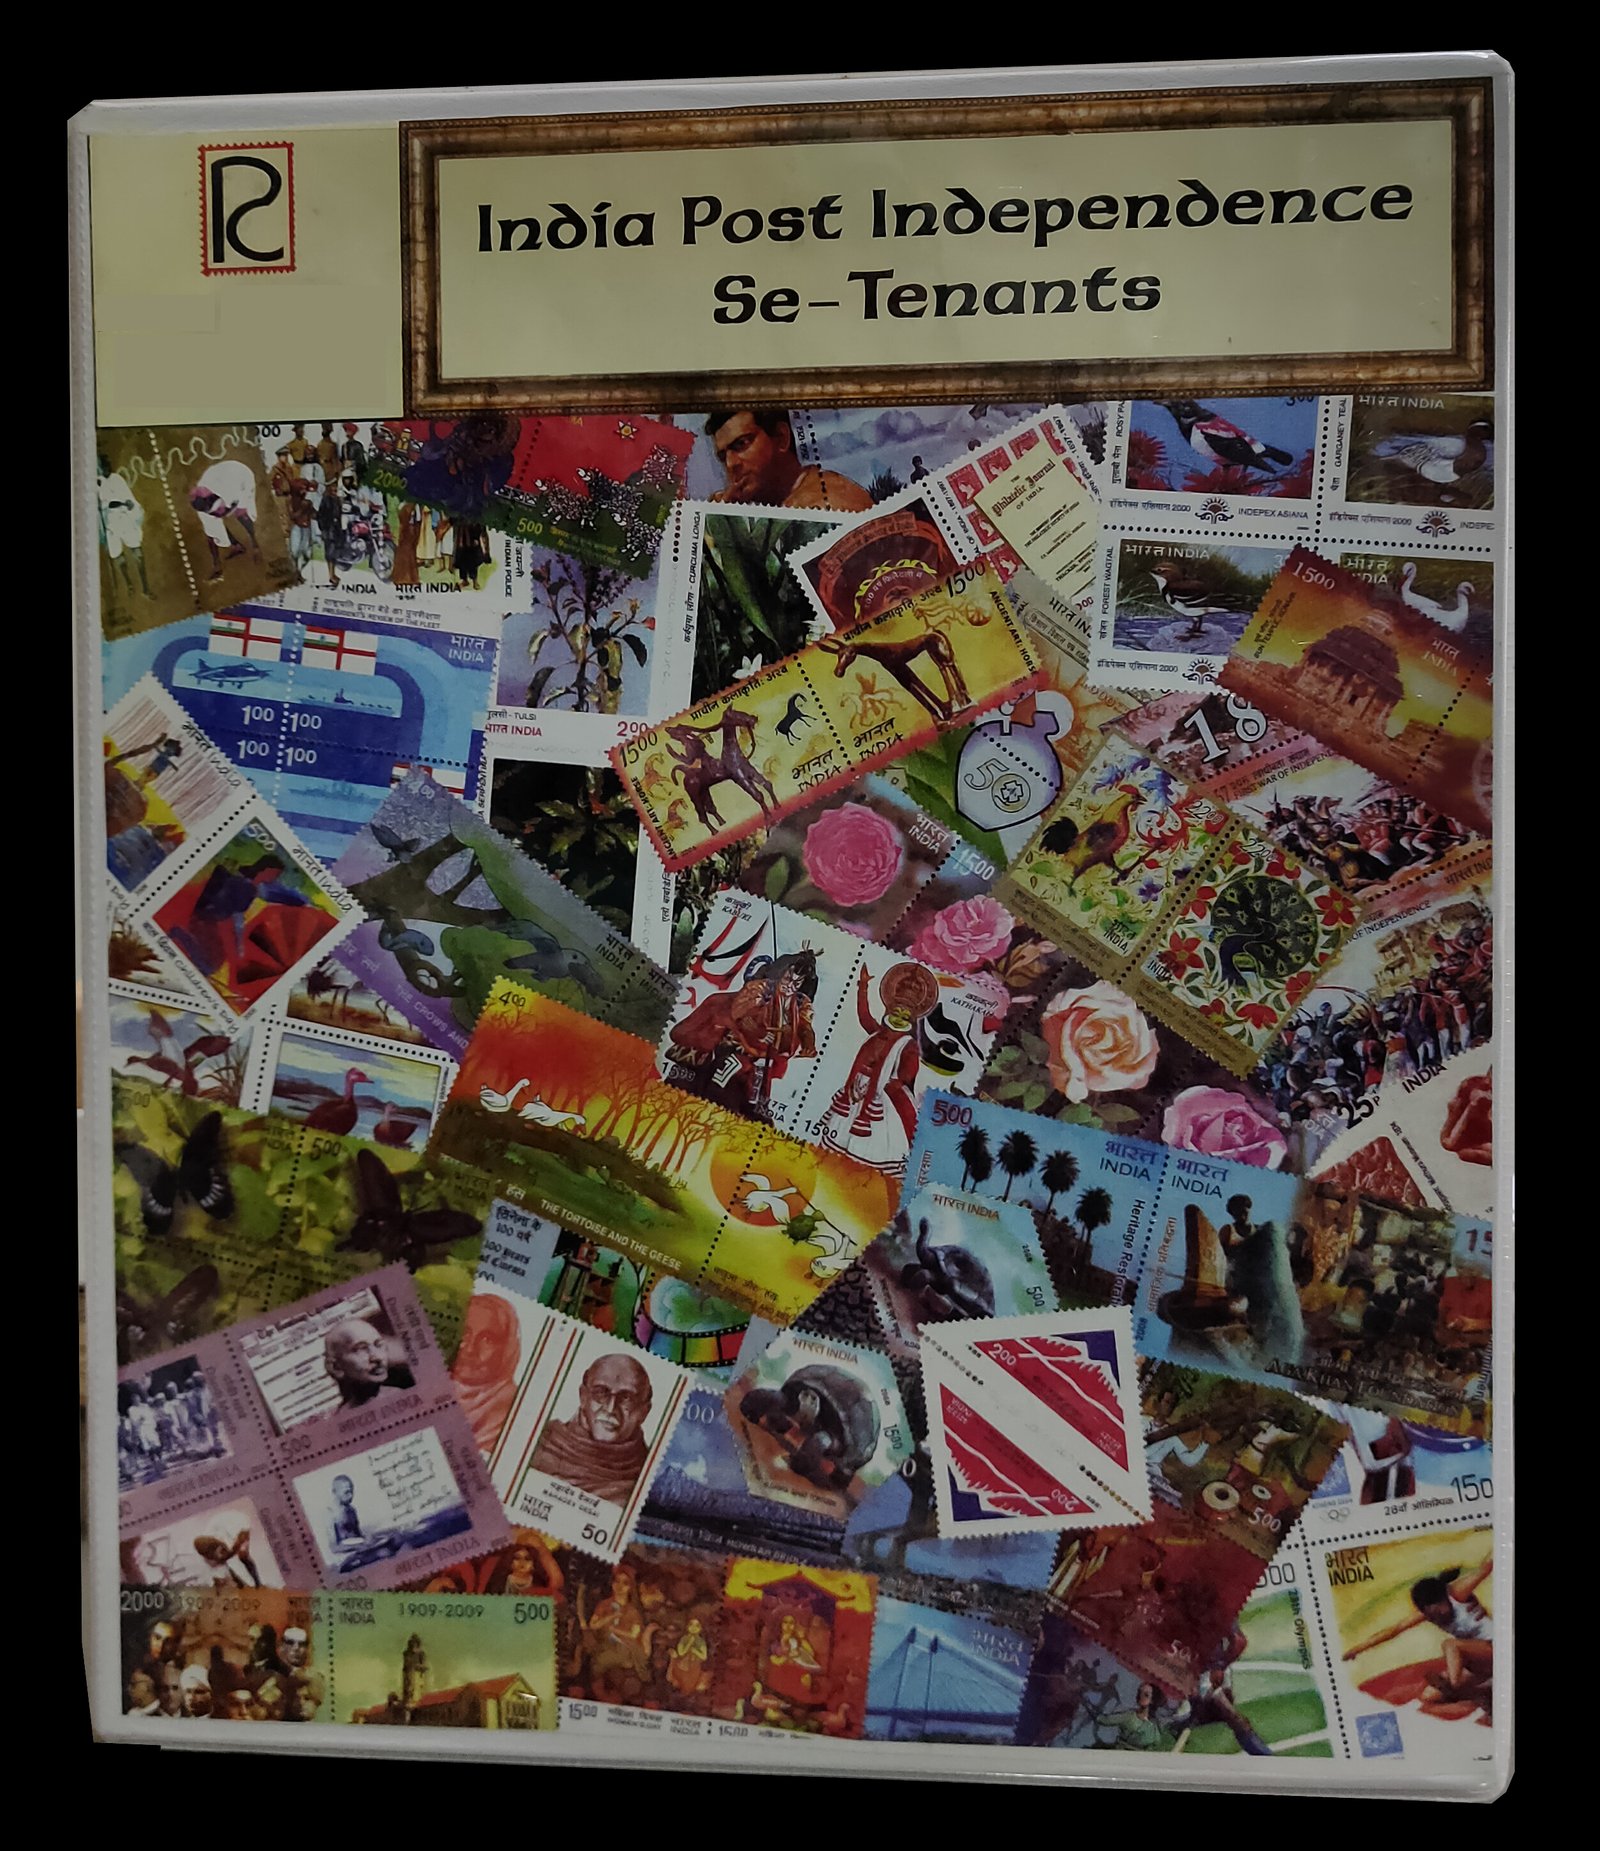 INDIA POST INDEPENDENCE, Se-Tenant 1974-2019, 36 Pages, 'A' Series (ALBUM WITH ONLY ILLUSTRATIONS , STAMPS NOT INCLUDED WITH ALBUM)